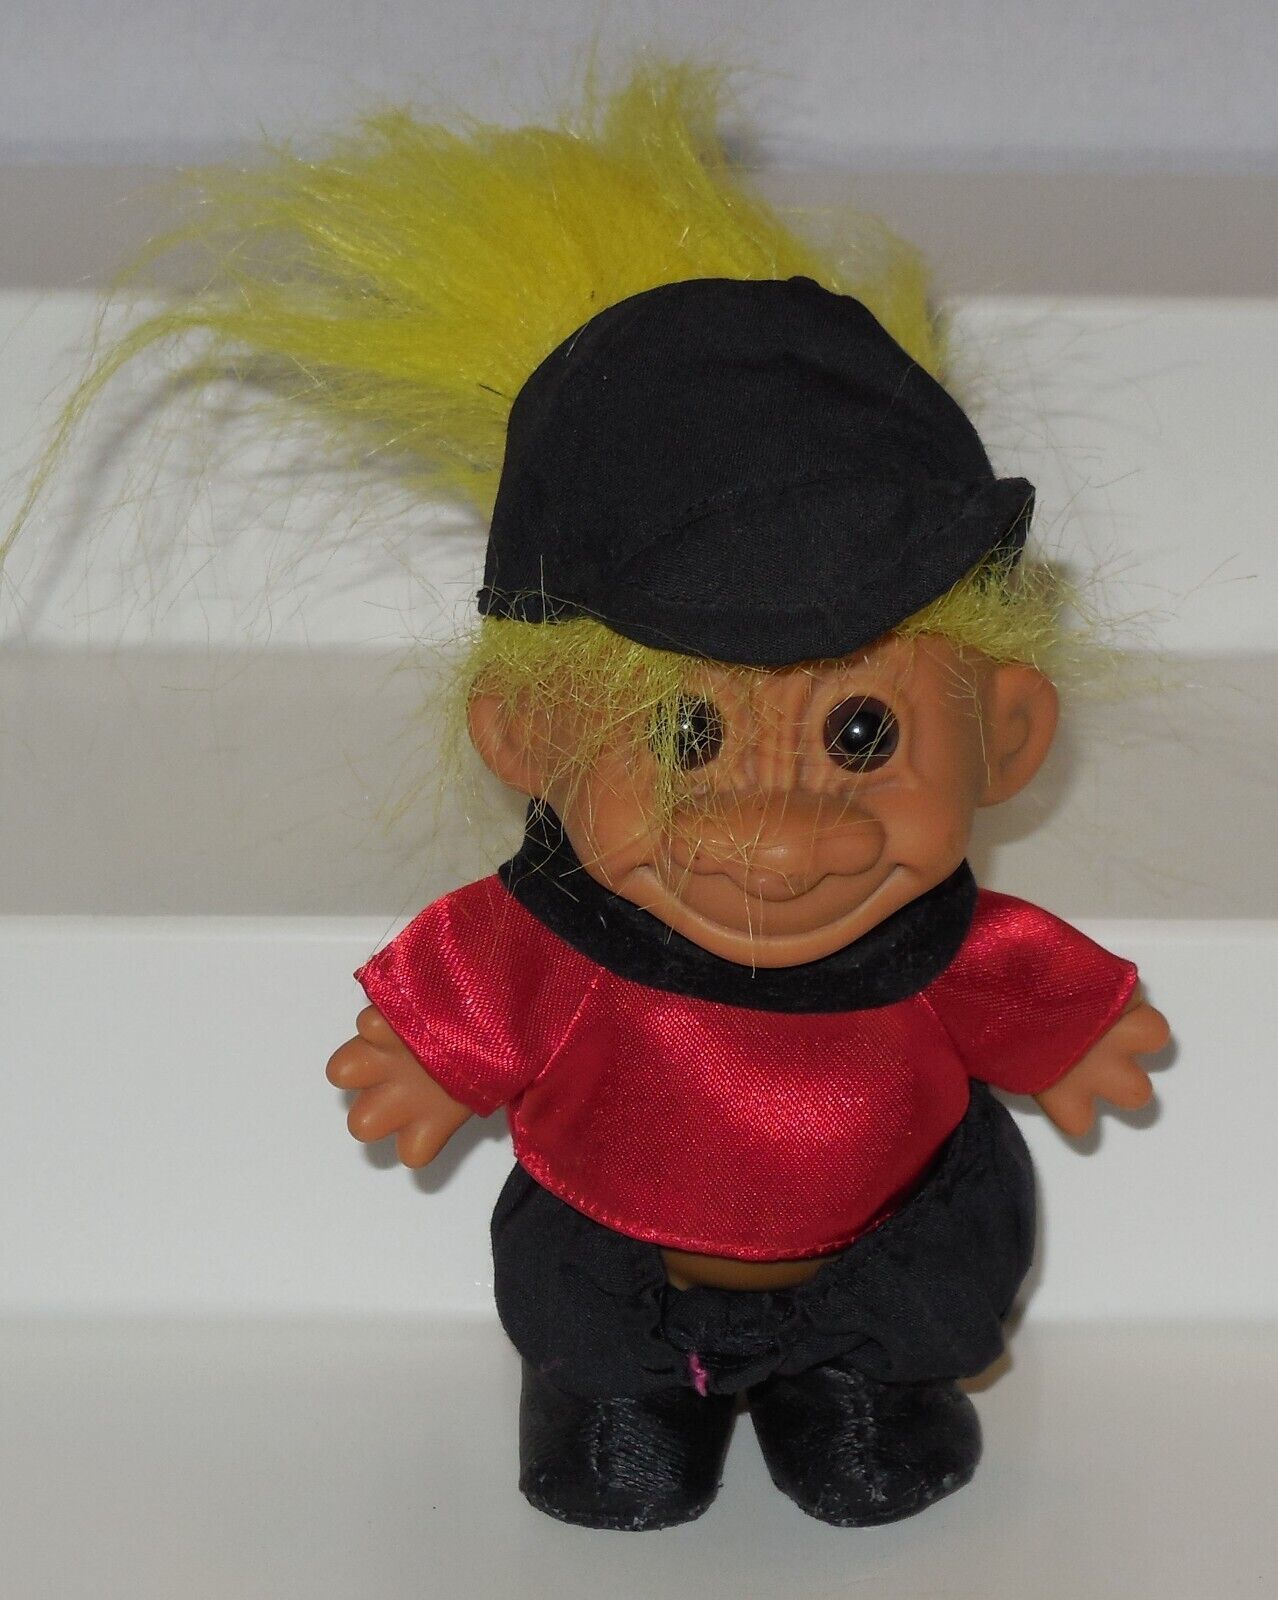 Vintage My Lucky Russ Berrie Troll 3" Doll Yellow Hair red black outfit - $14.50